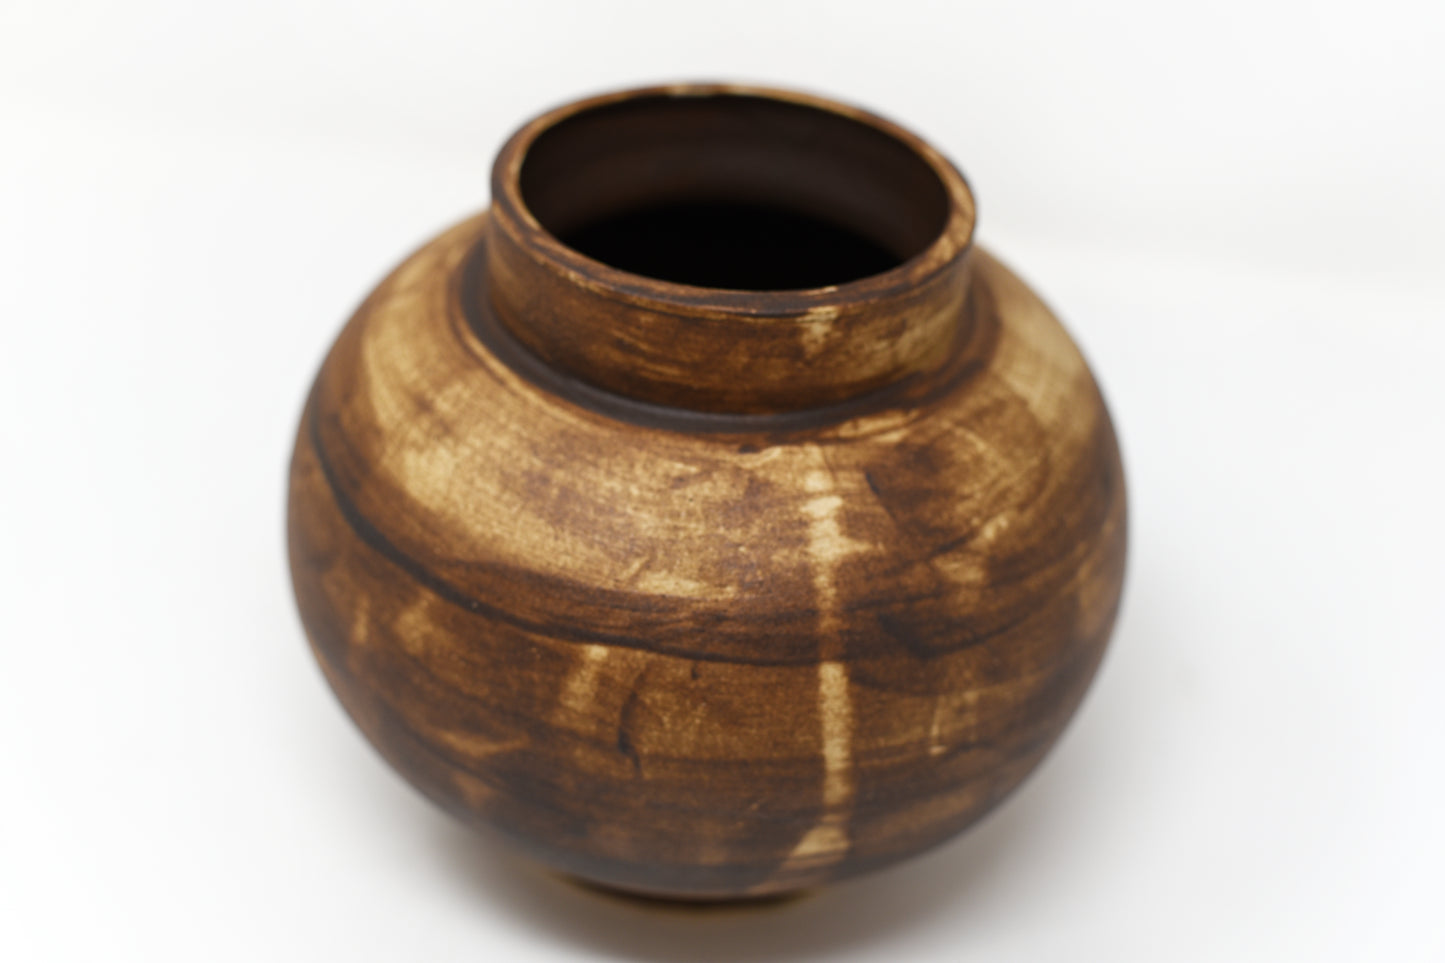 Wide Pot by Hannah Way